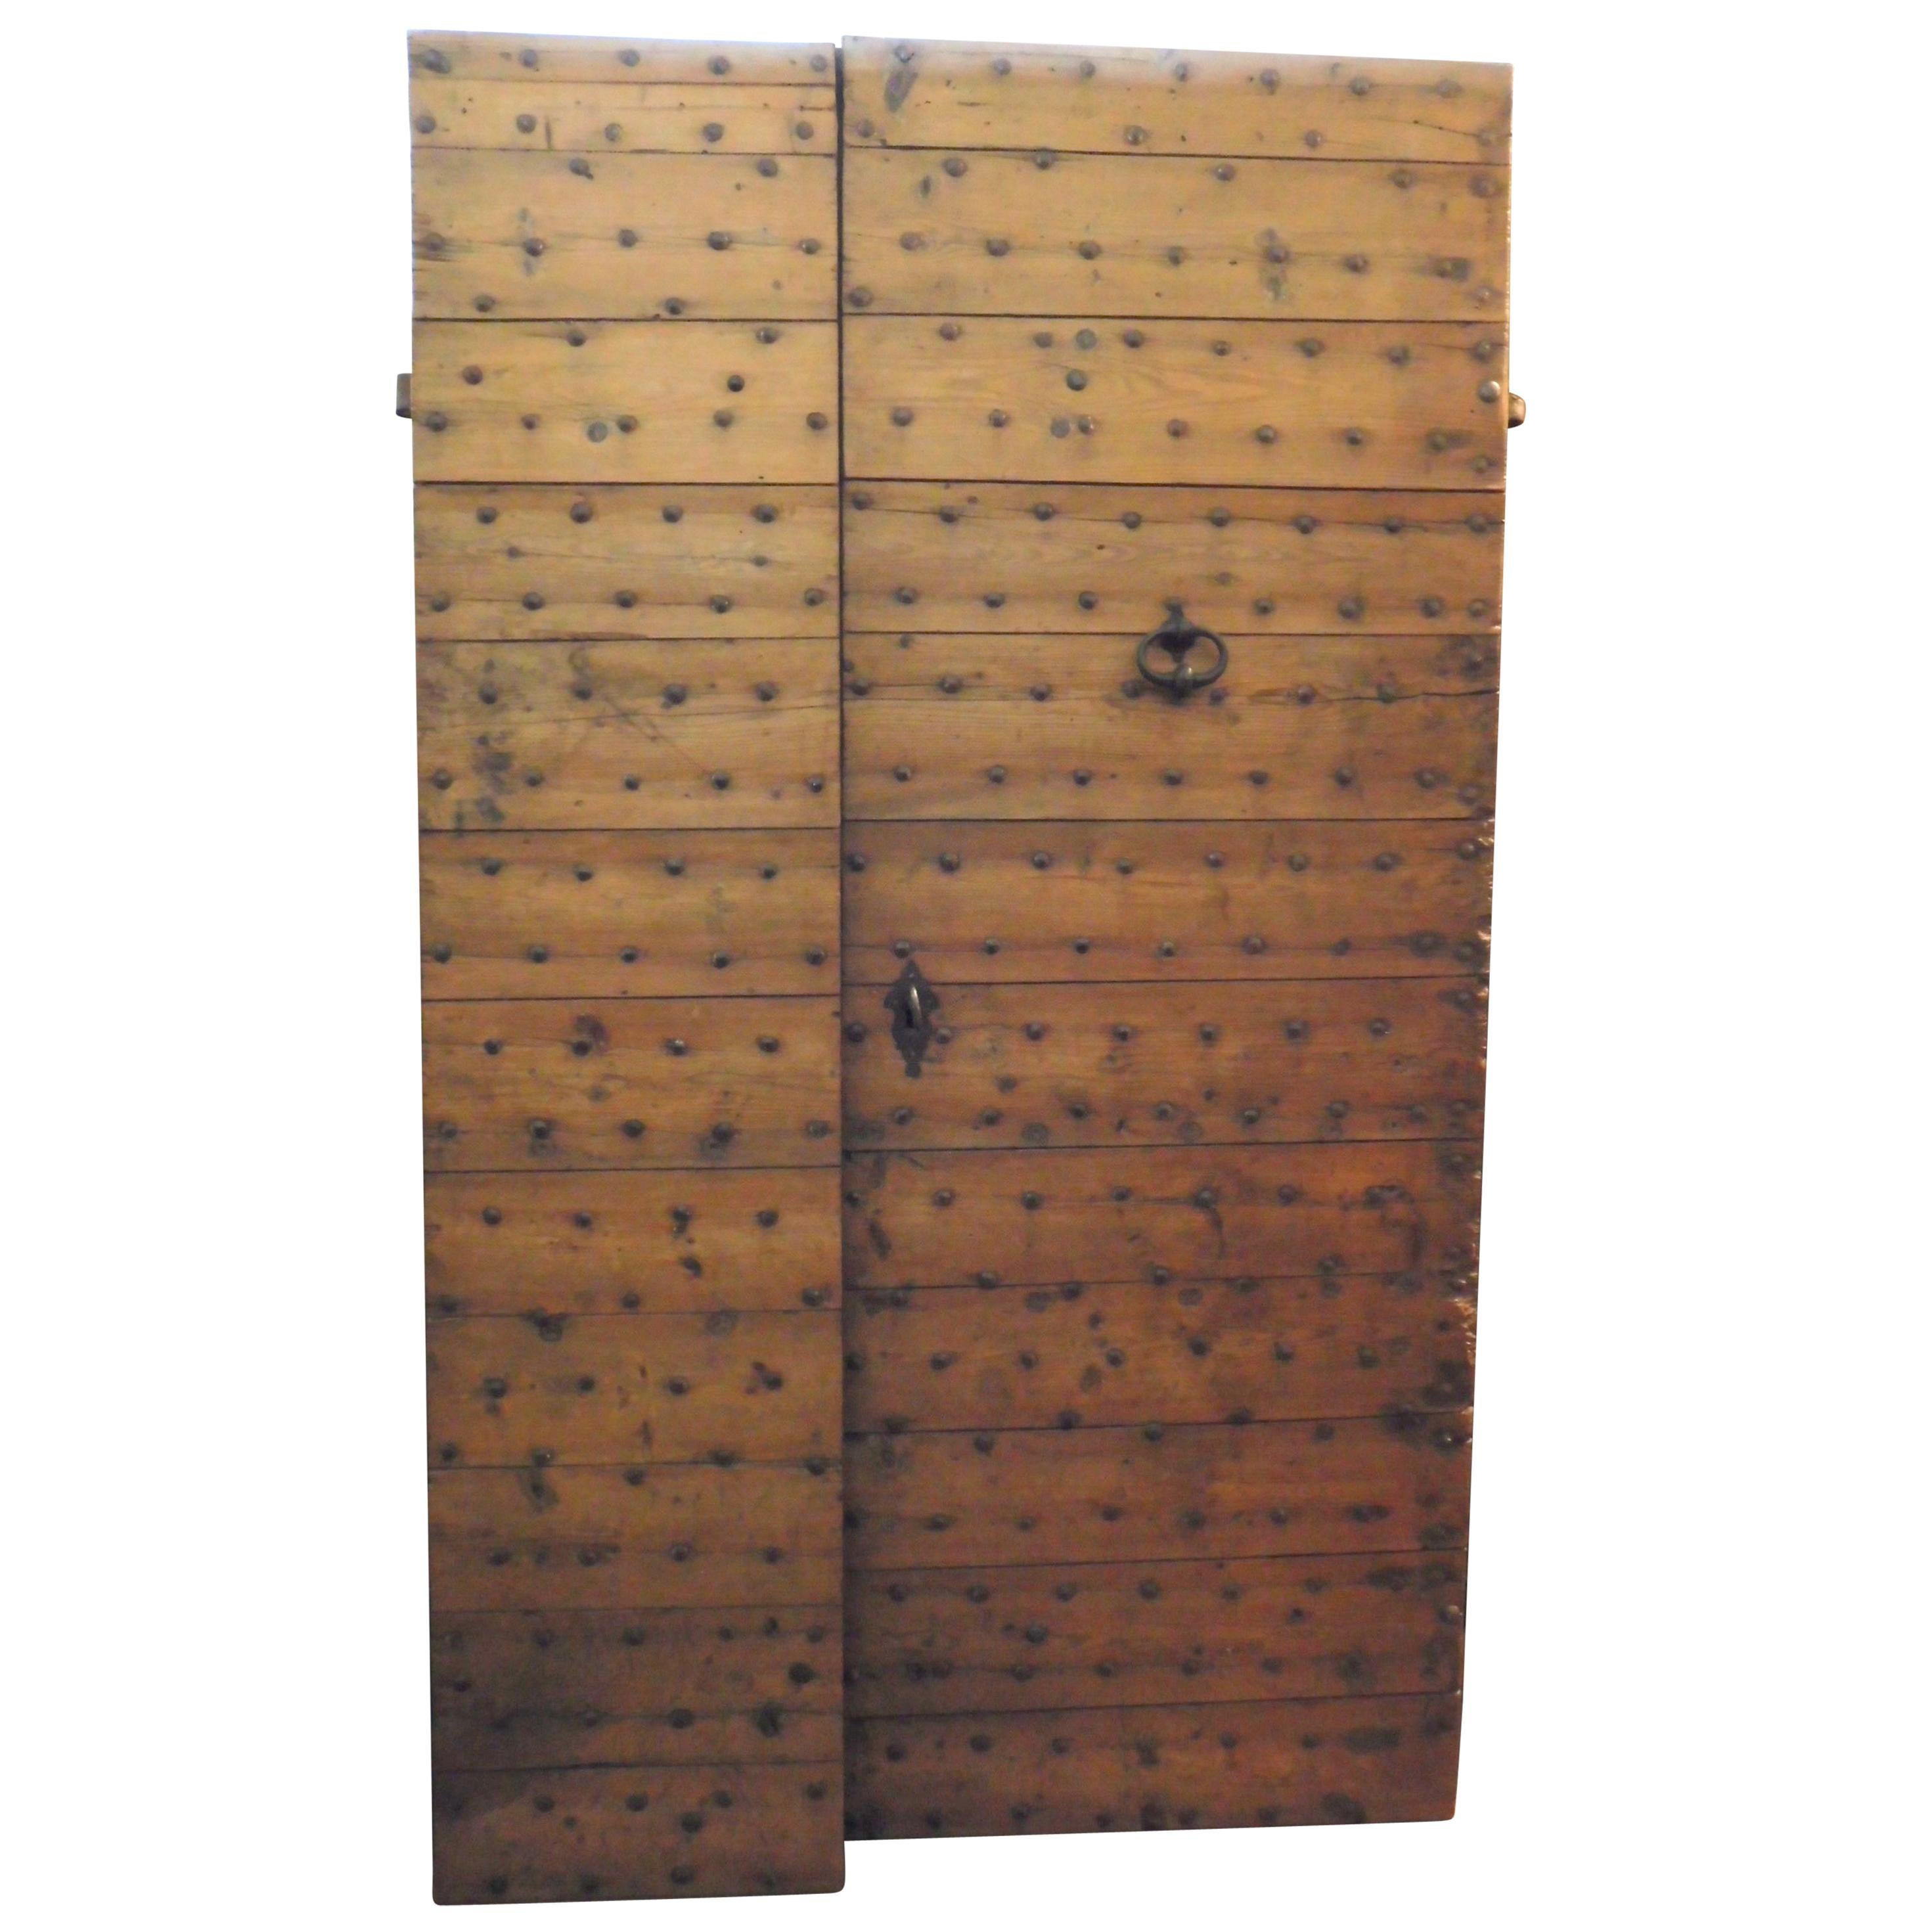 Antique Larch Entry Door, with Nails Rustic Wood, 1700, Italy